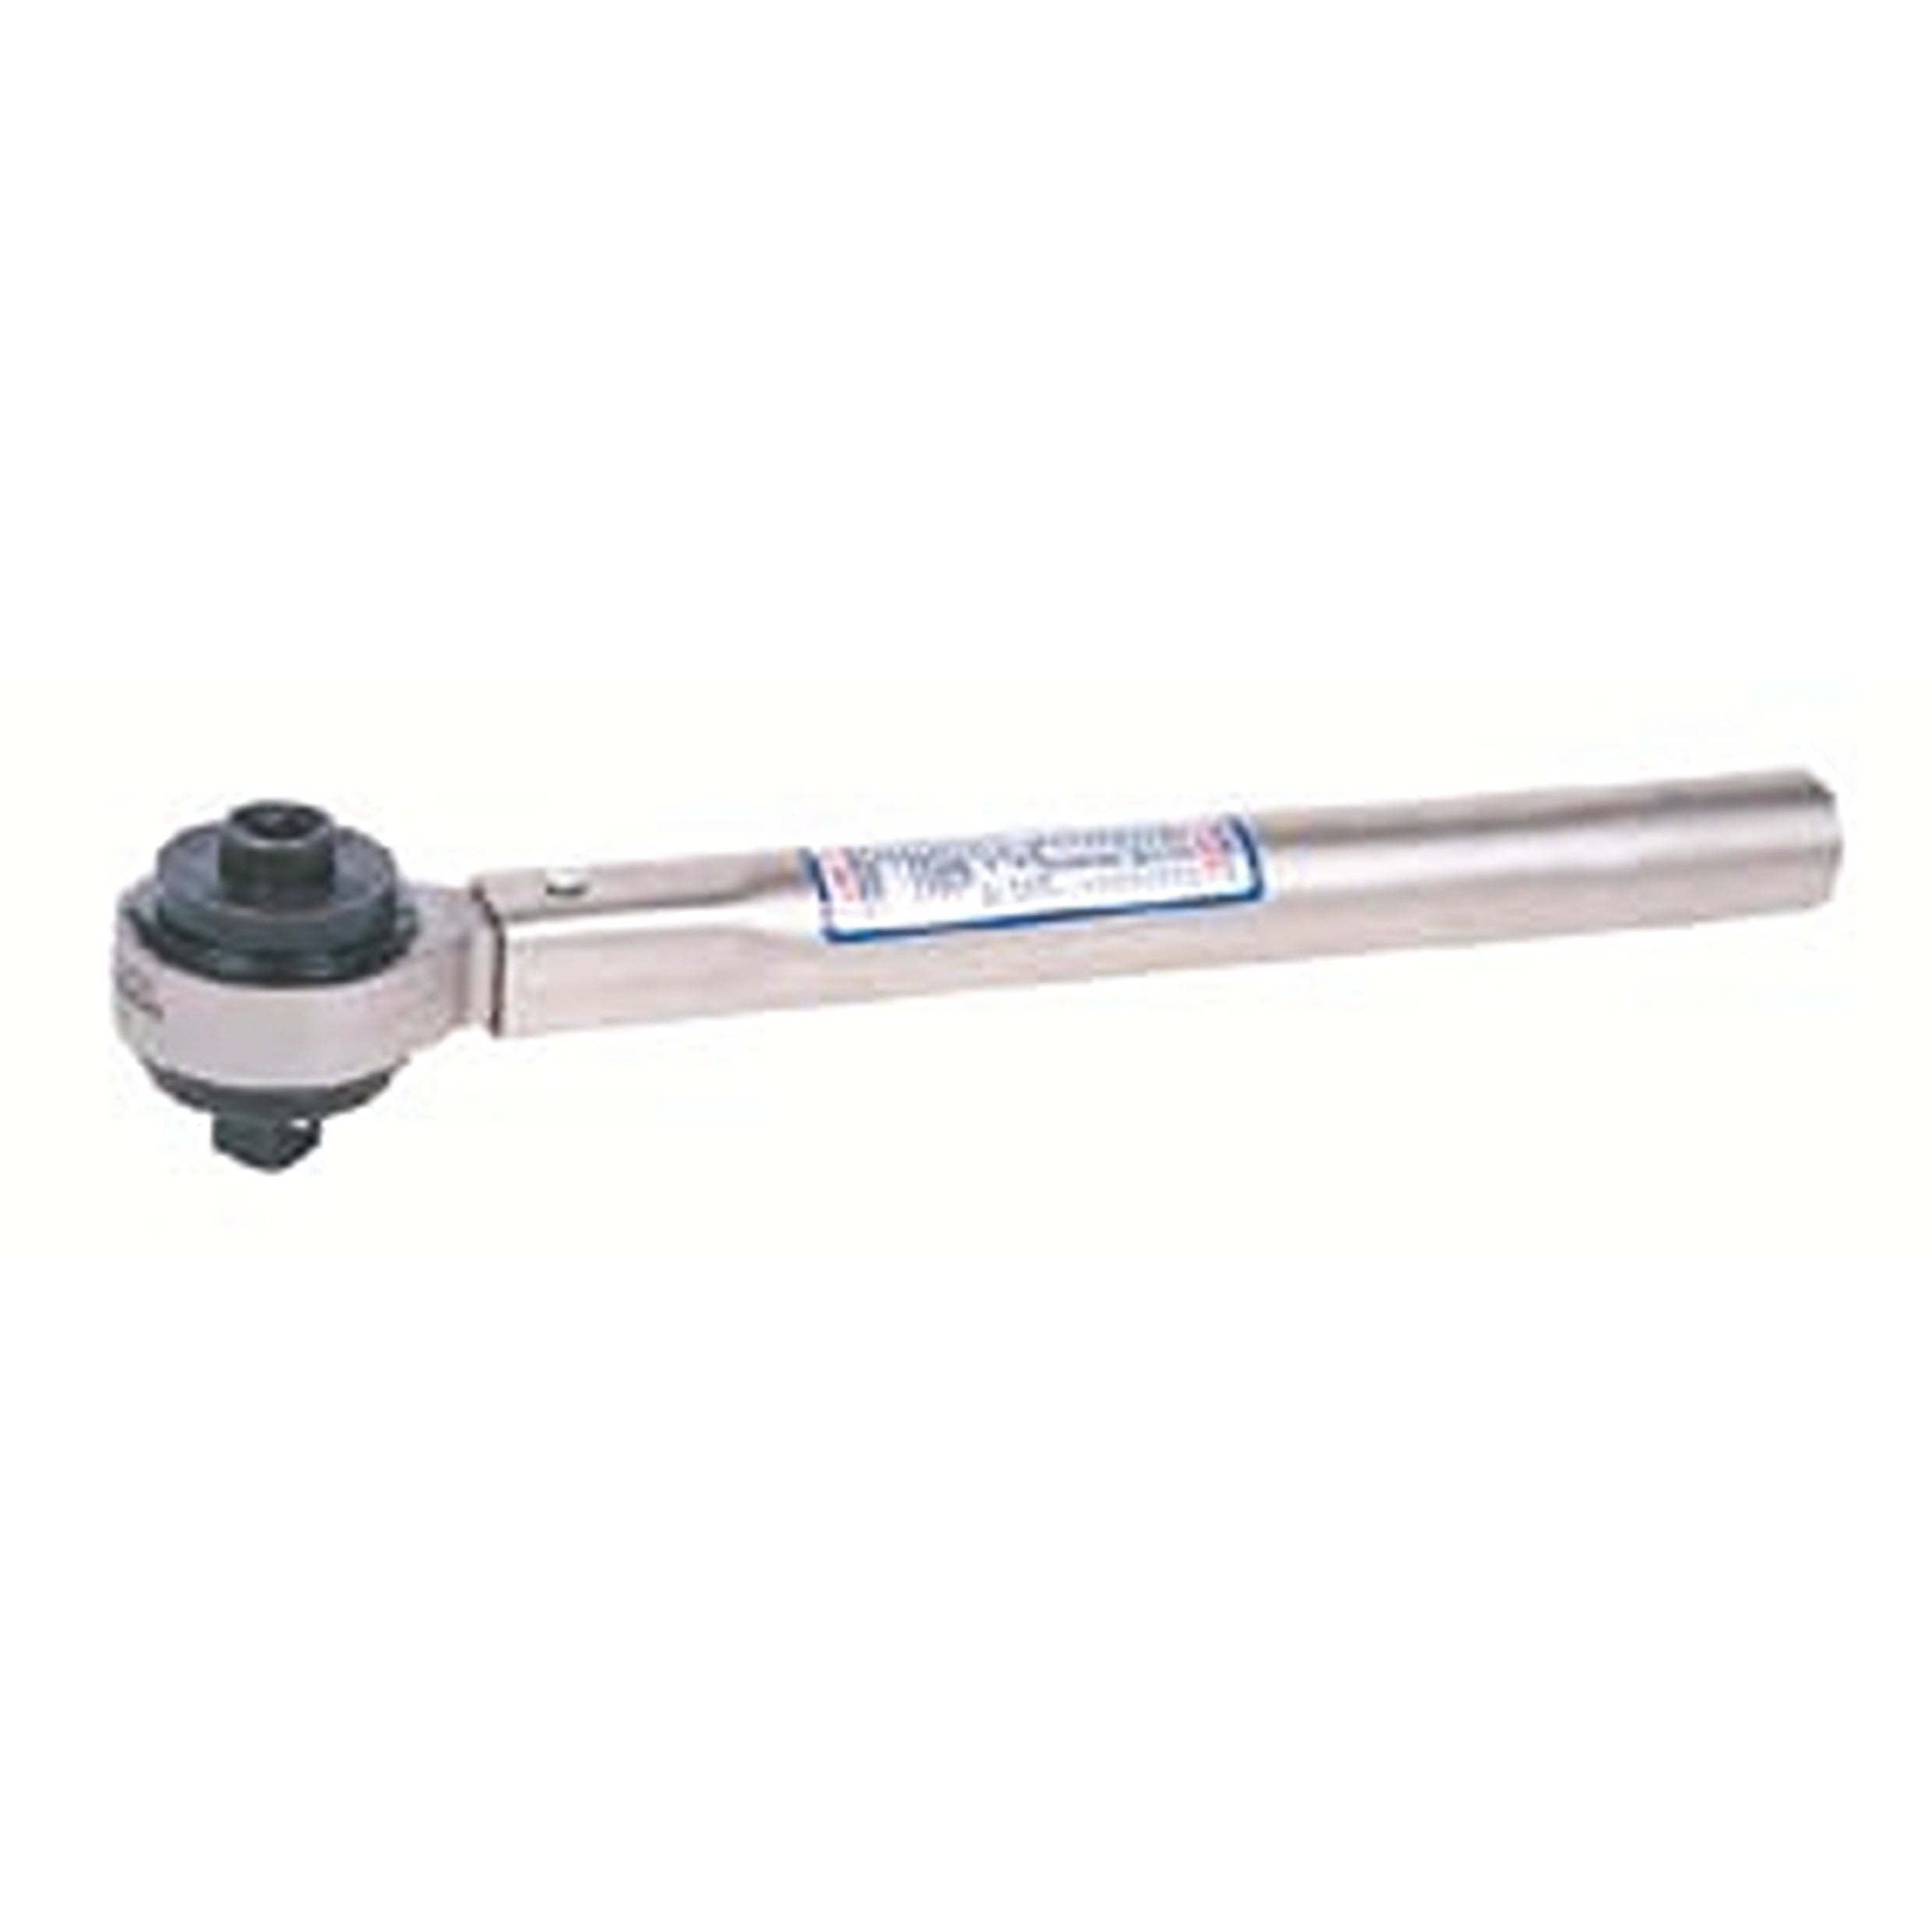 BRITOOL HXT28 3/4" Torque Wrench Multiprliers (BRITOOL) - Premium 3/4" Torque Wrench from BRITOOL - Shop now at Yew Aik.